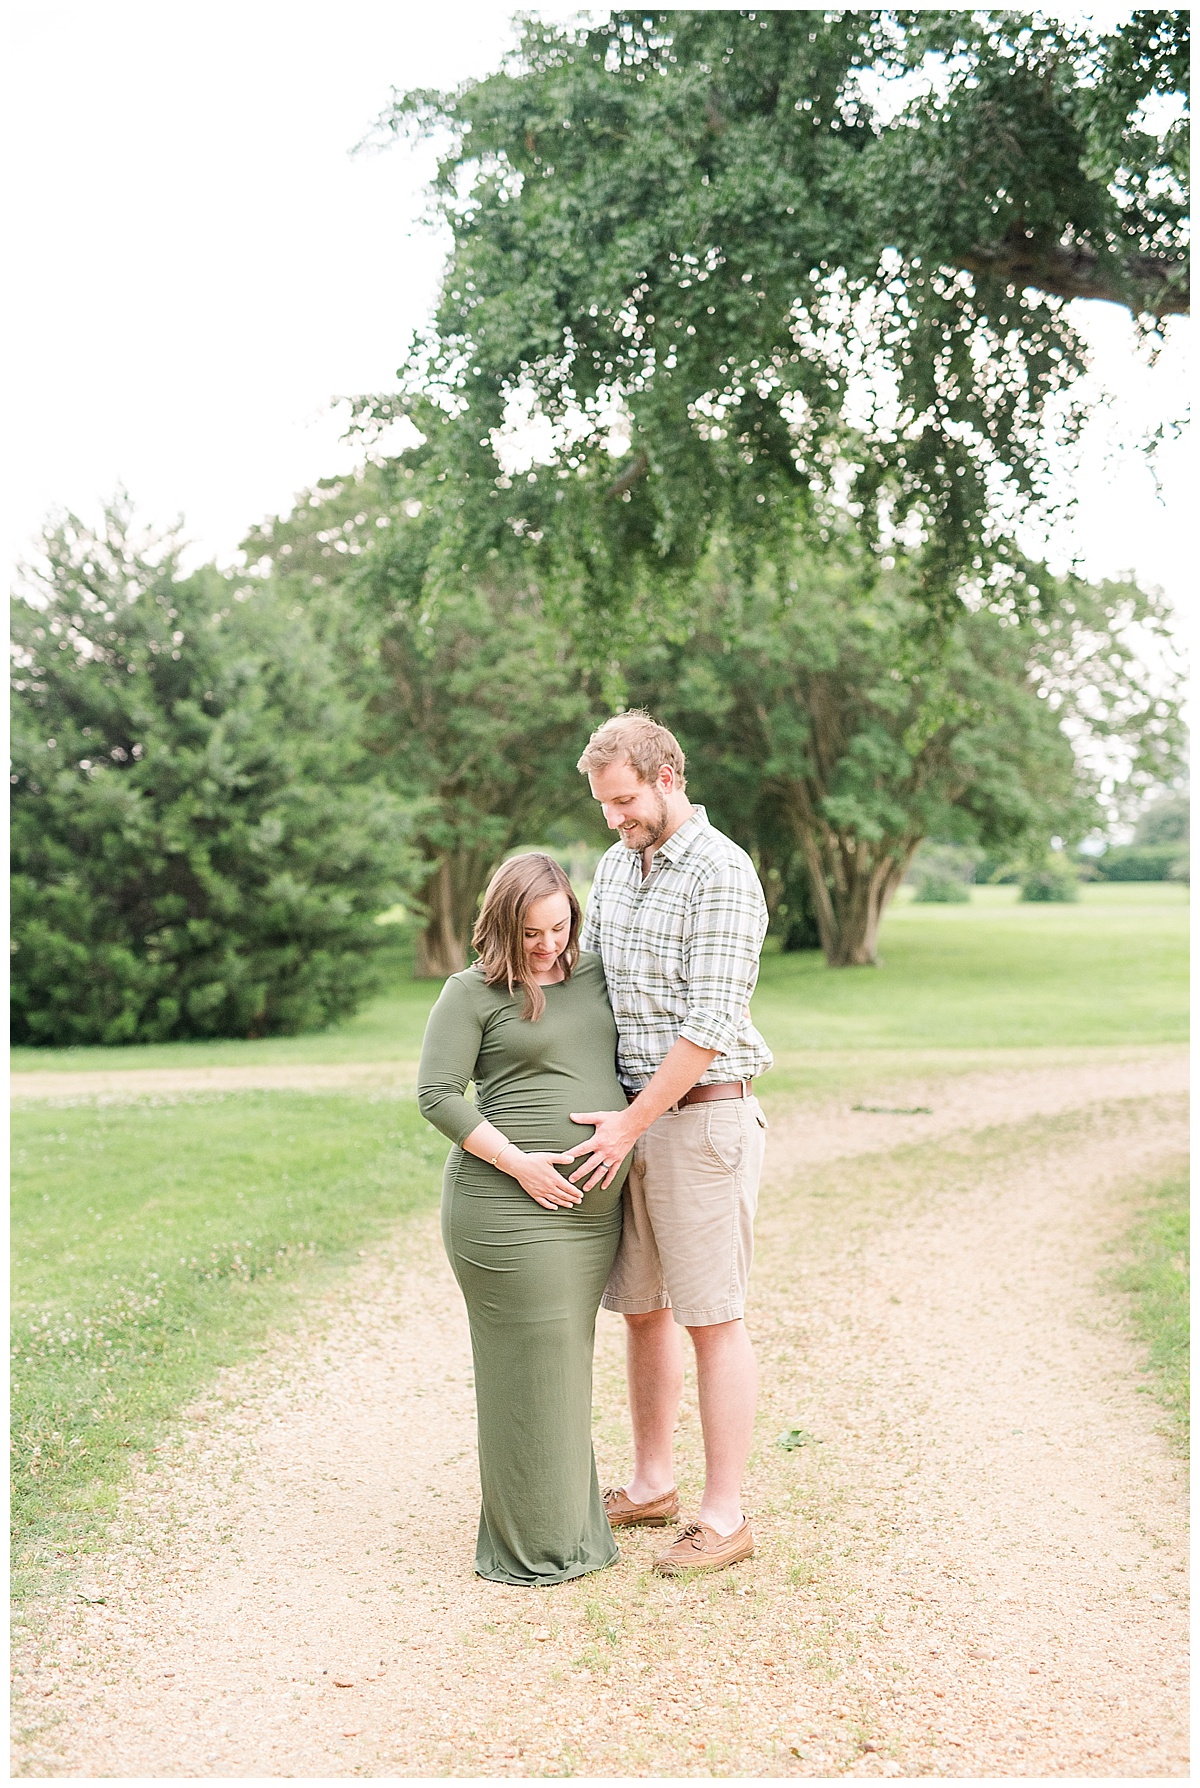 City Point Hopewell, Tri-Cities Photographer, Prince George Photographer, Prince George Virginia, Virginia Family Photographer, Family Photographer, Maternity Photographer, Maternity Pictures, Caiti Garter Photography